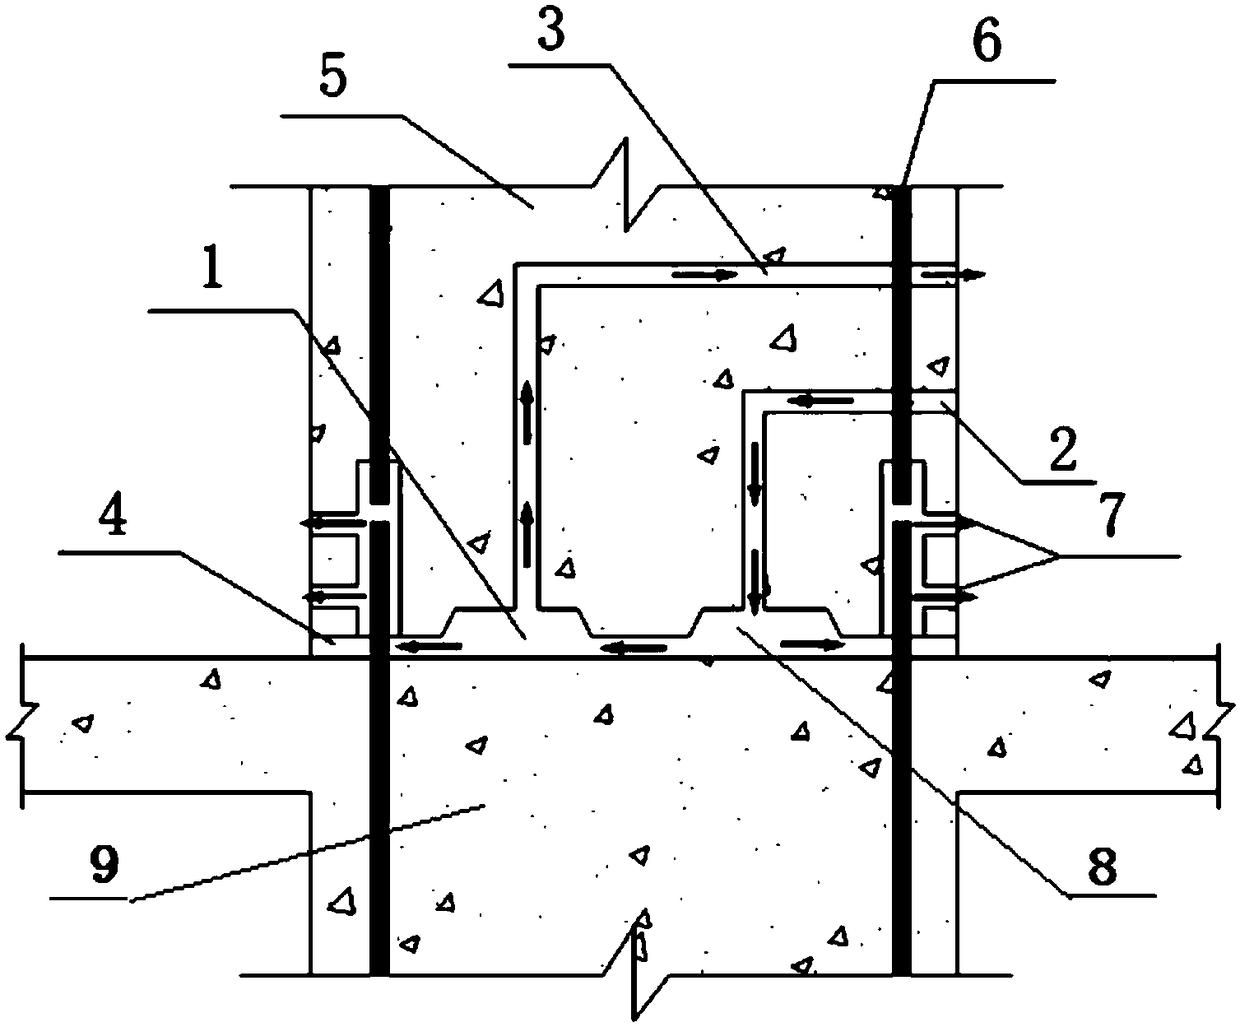 Design method for grouting channel of prefabricated concrete vertical members